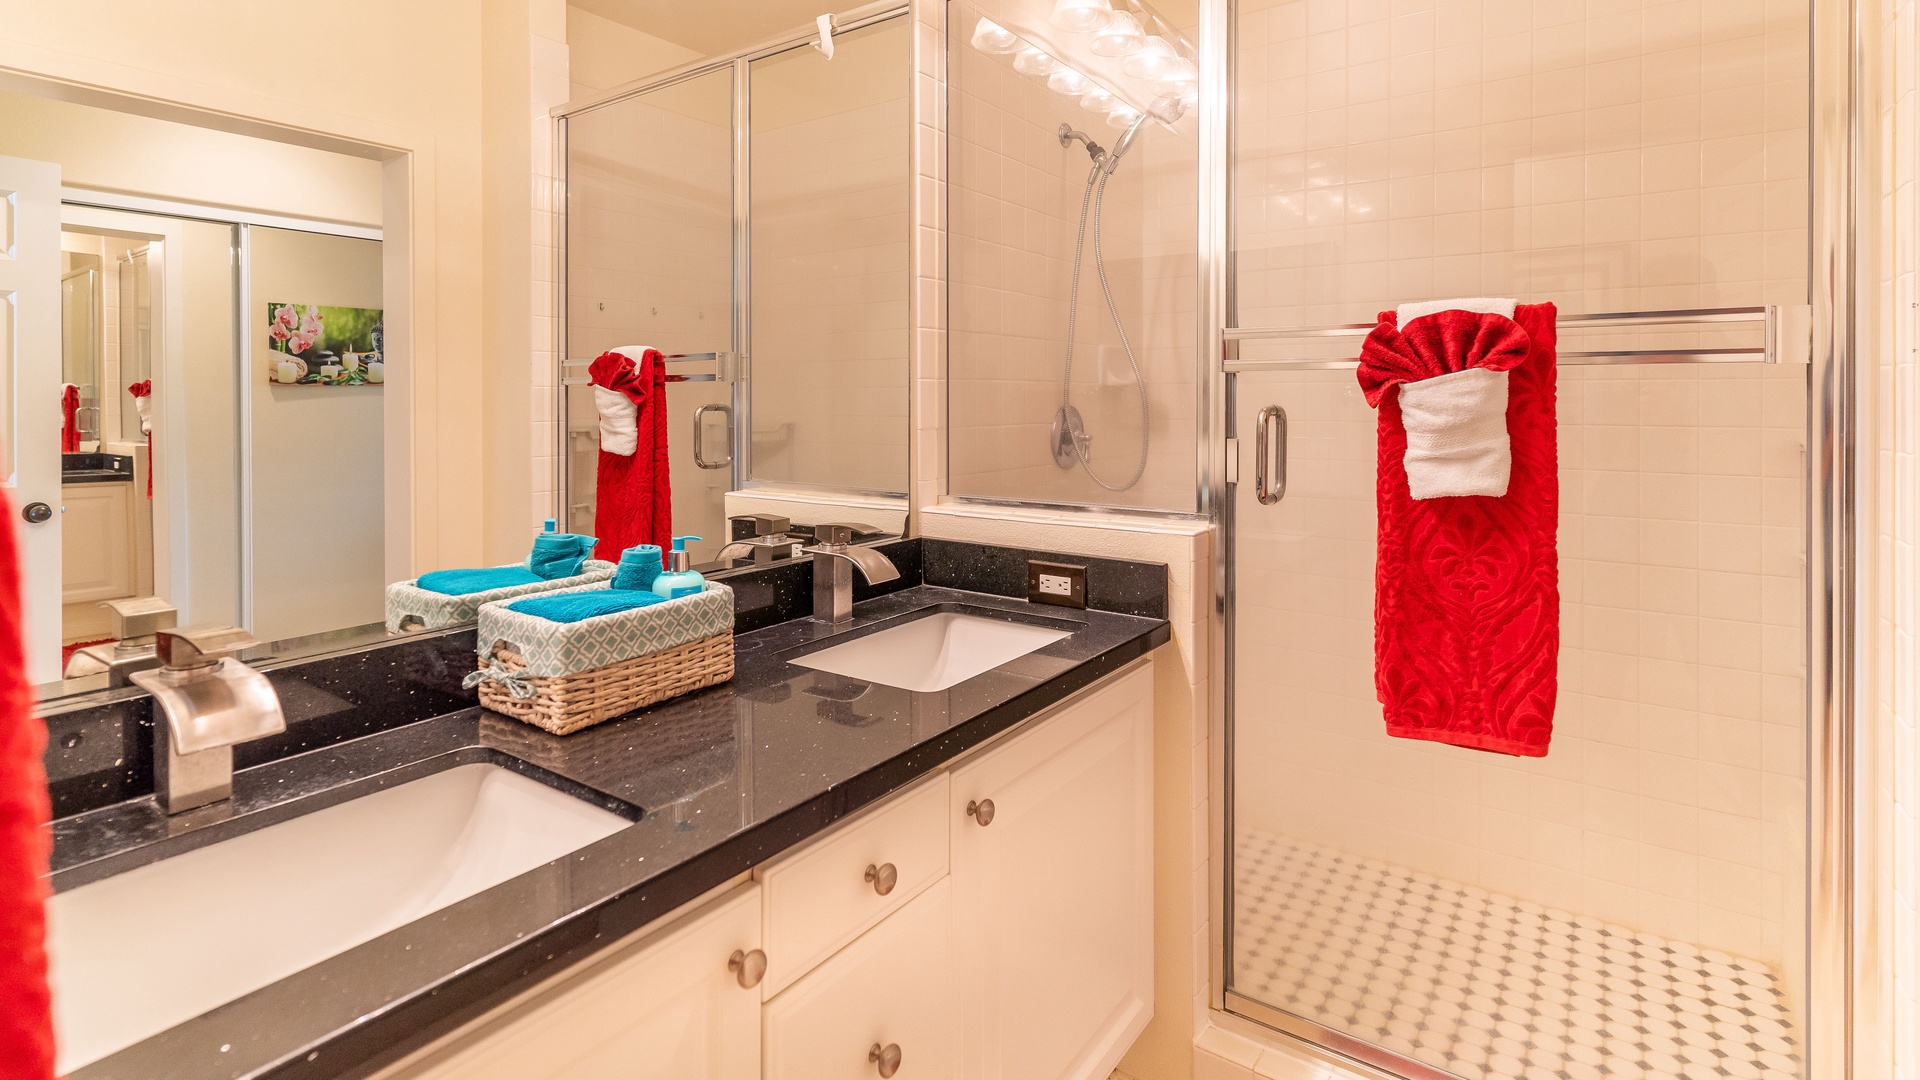 Kapolei Vacation Rentals, Coconut Plantation 1086-4 - The primary guest bathroom featuring a double vanity and walk-in shower.